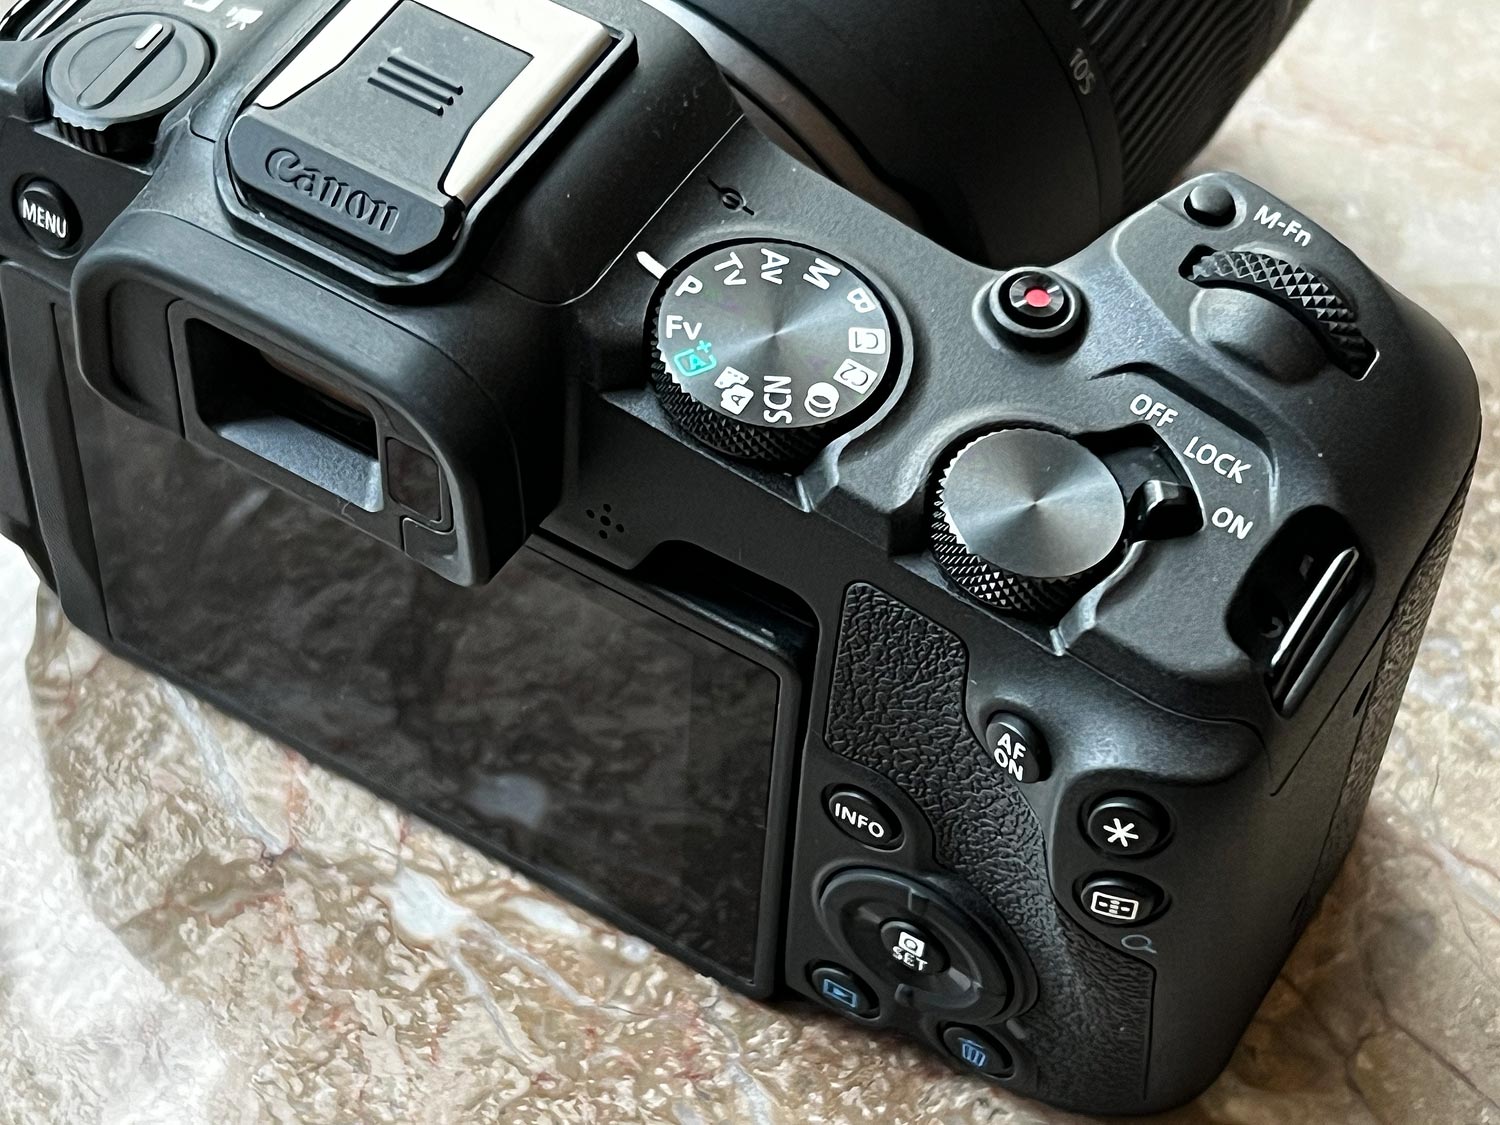 Canon R8 Camera Review, Affordable Full Frame Camera - The Slanted Lens